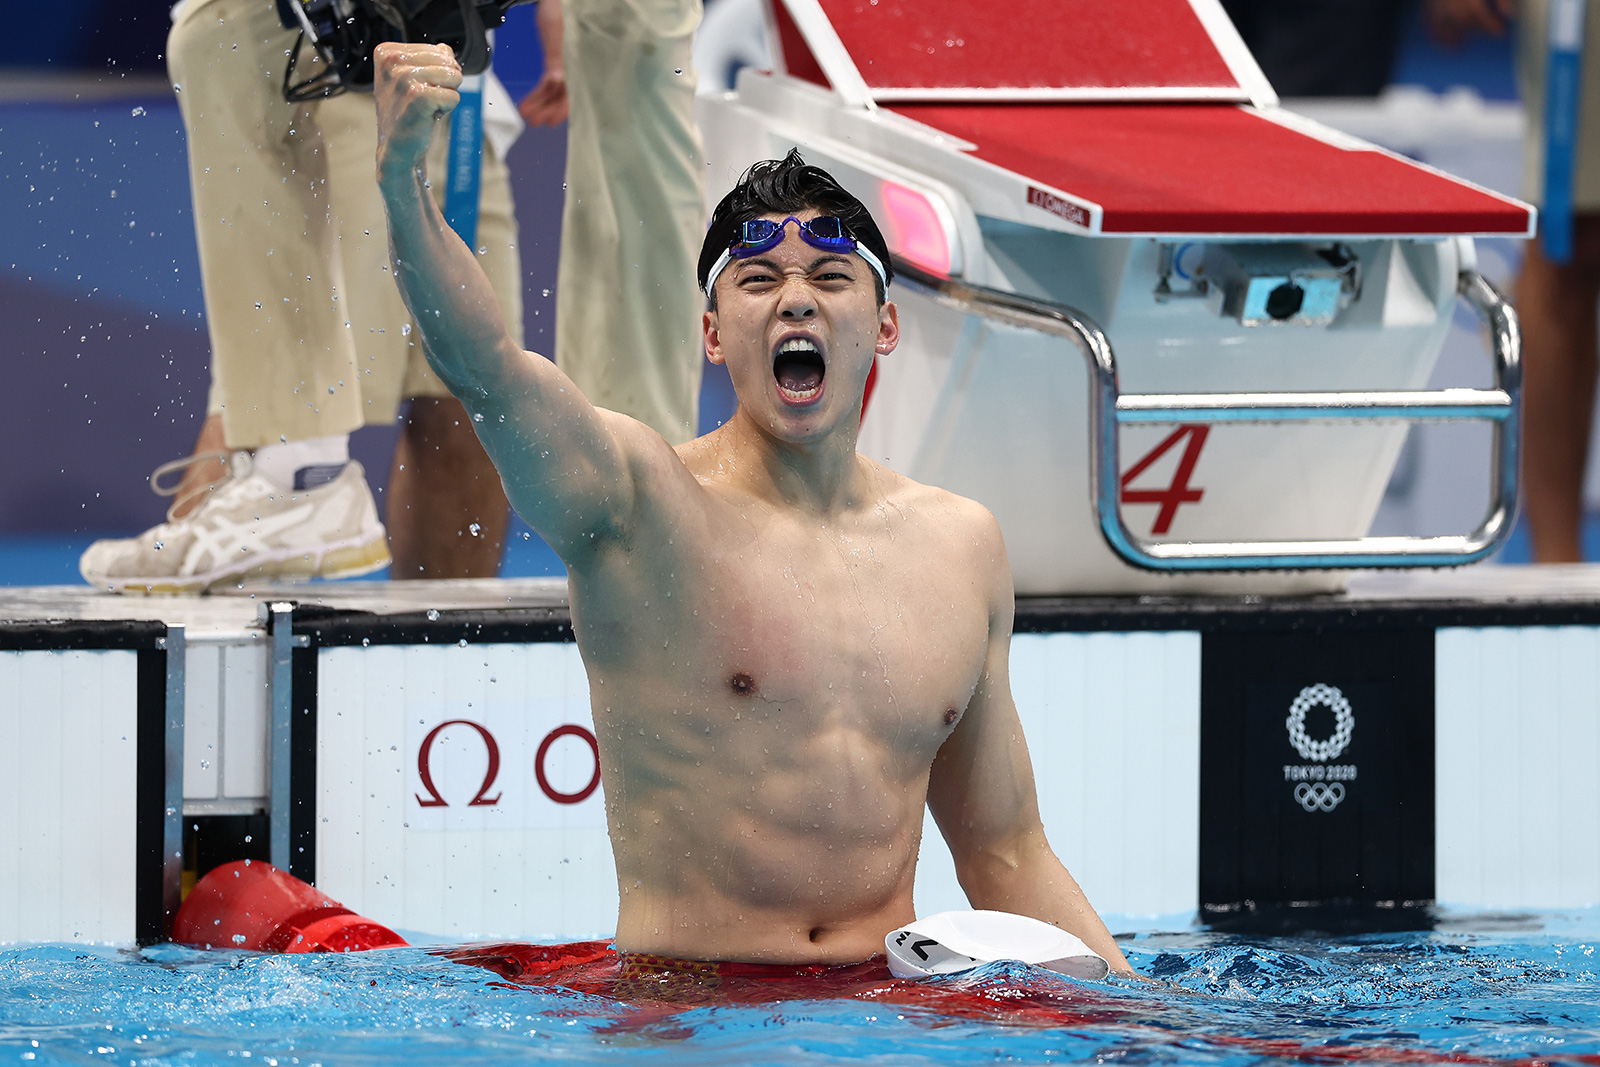 Wang Shun of China celebrates after winning a gold medal in the men's 200-meter individual medley on Friday in Tokyo.